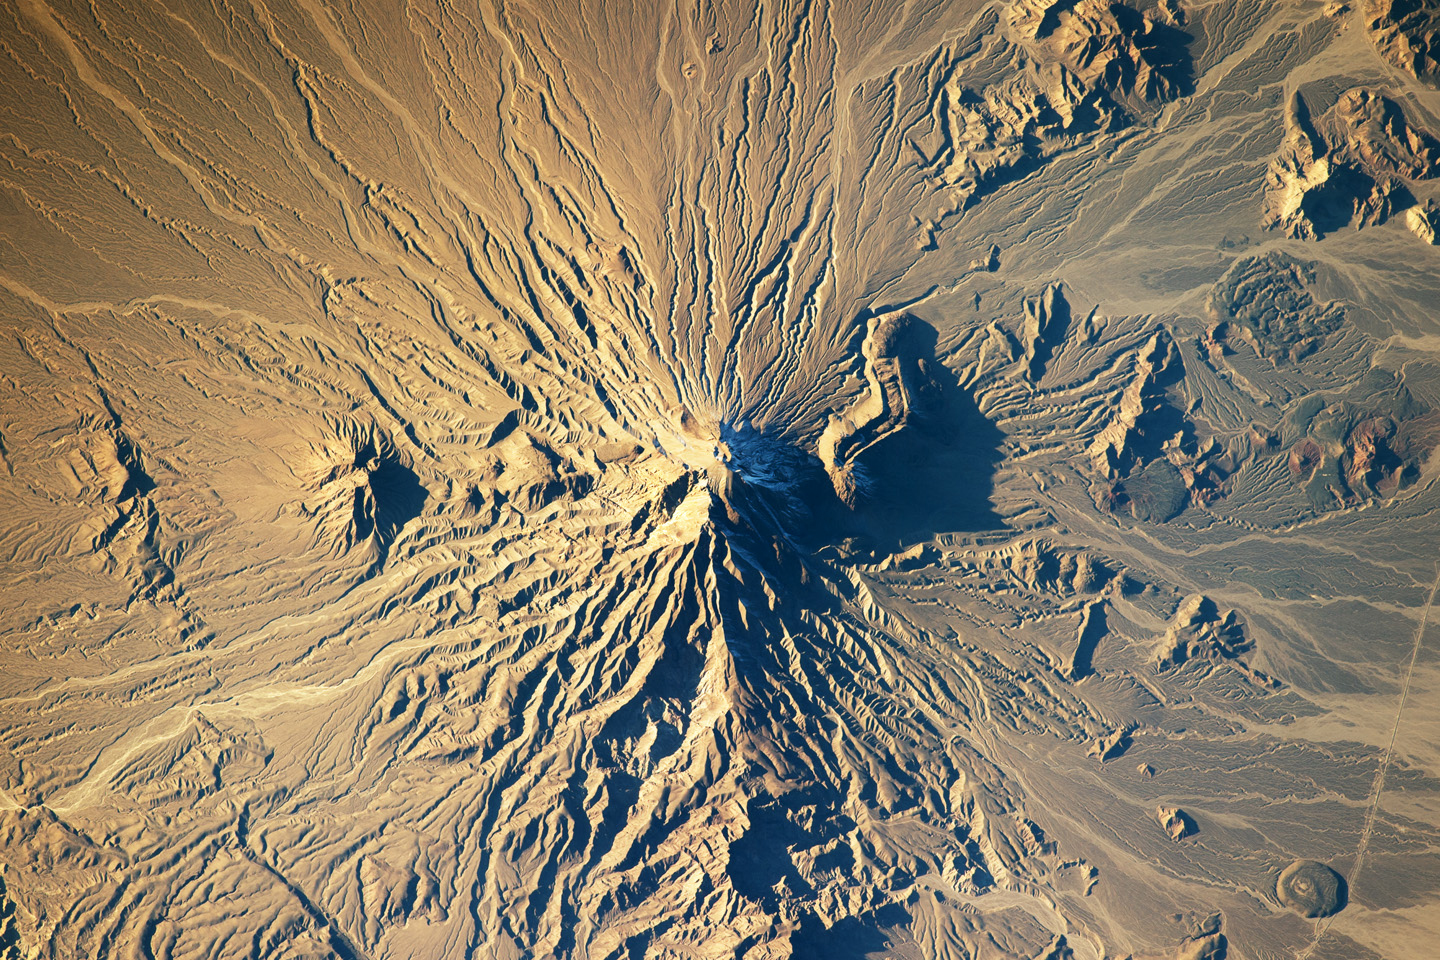 Bazman volcano is located in a remote region of southern Iran.